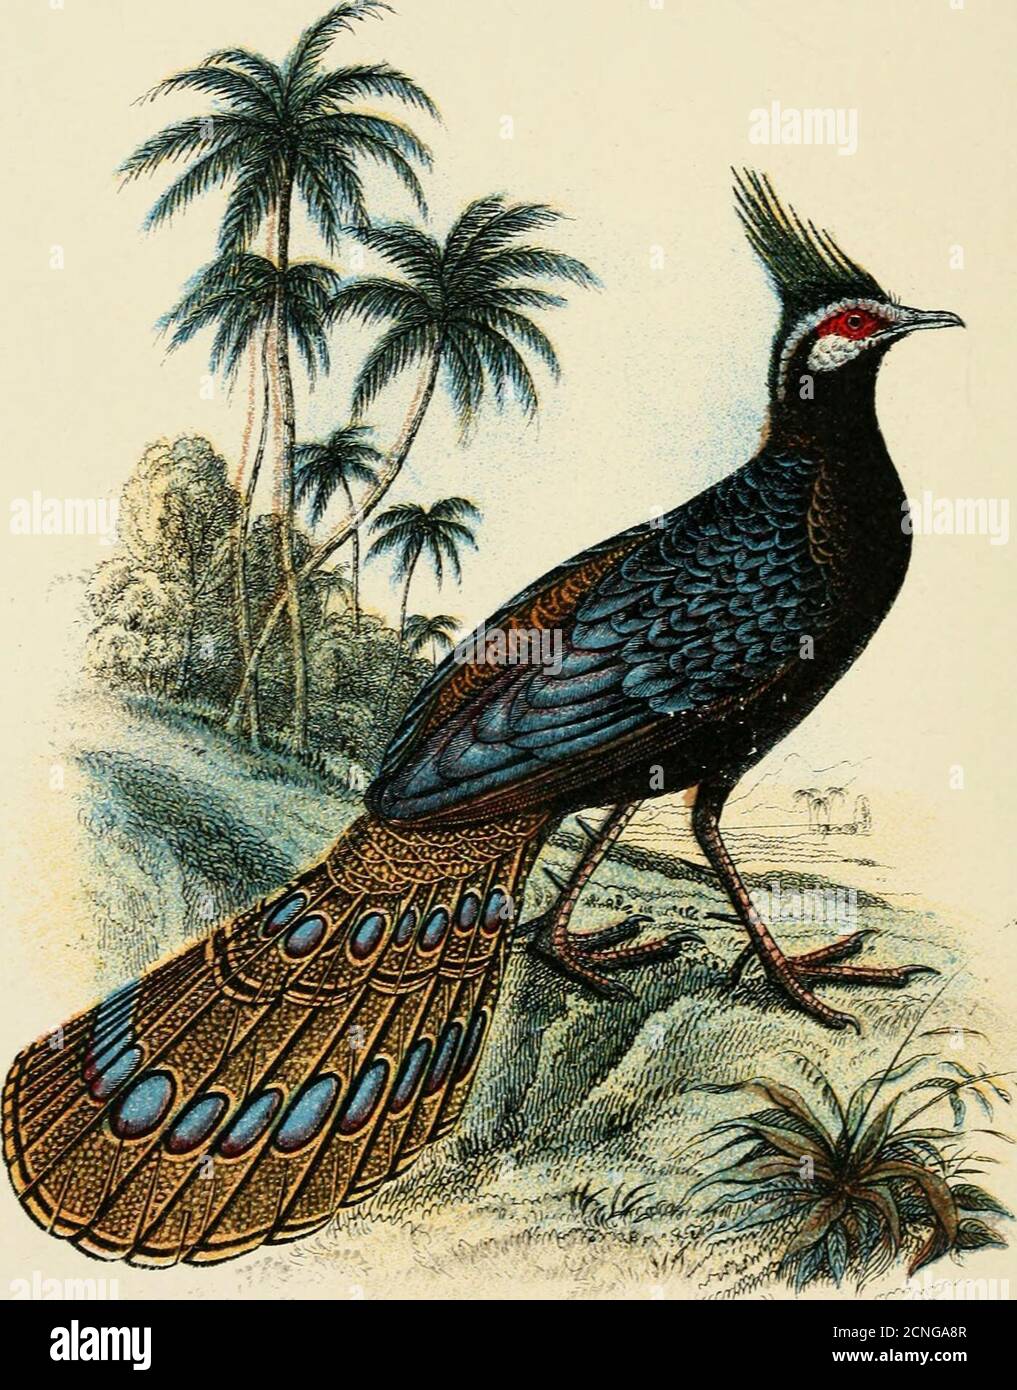 . A hand-book to the game-birds . of the birds own feathers,placed amongst grass among jungle {R. A. Clark). Eggs.—Like those of the Golden Pheasant. Averagemeasurements, 2 by i44 inches (7?. A. Clark). IT. Germains peacock-pheasant, polyplectron GERMAINI, Polyphdroii germaini^ Elliot, Ibis, 1866, p. 56; id. MonogrPhasian. i. pi. 8 (1872); Ogilvie-Grant, Cat. B. Brit. Mus.xxii. p. 357 (1893). Adult Male.—Like the male of P. chi?iqins, but the whitish-brown spots on the upper-parts are jjiuch smaller and closertogether ; the ocelli on the tail-feathers dark green with bluish-violet reflections Stock Photo